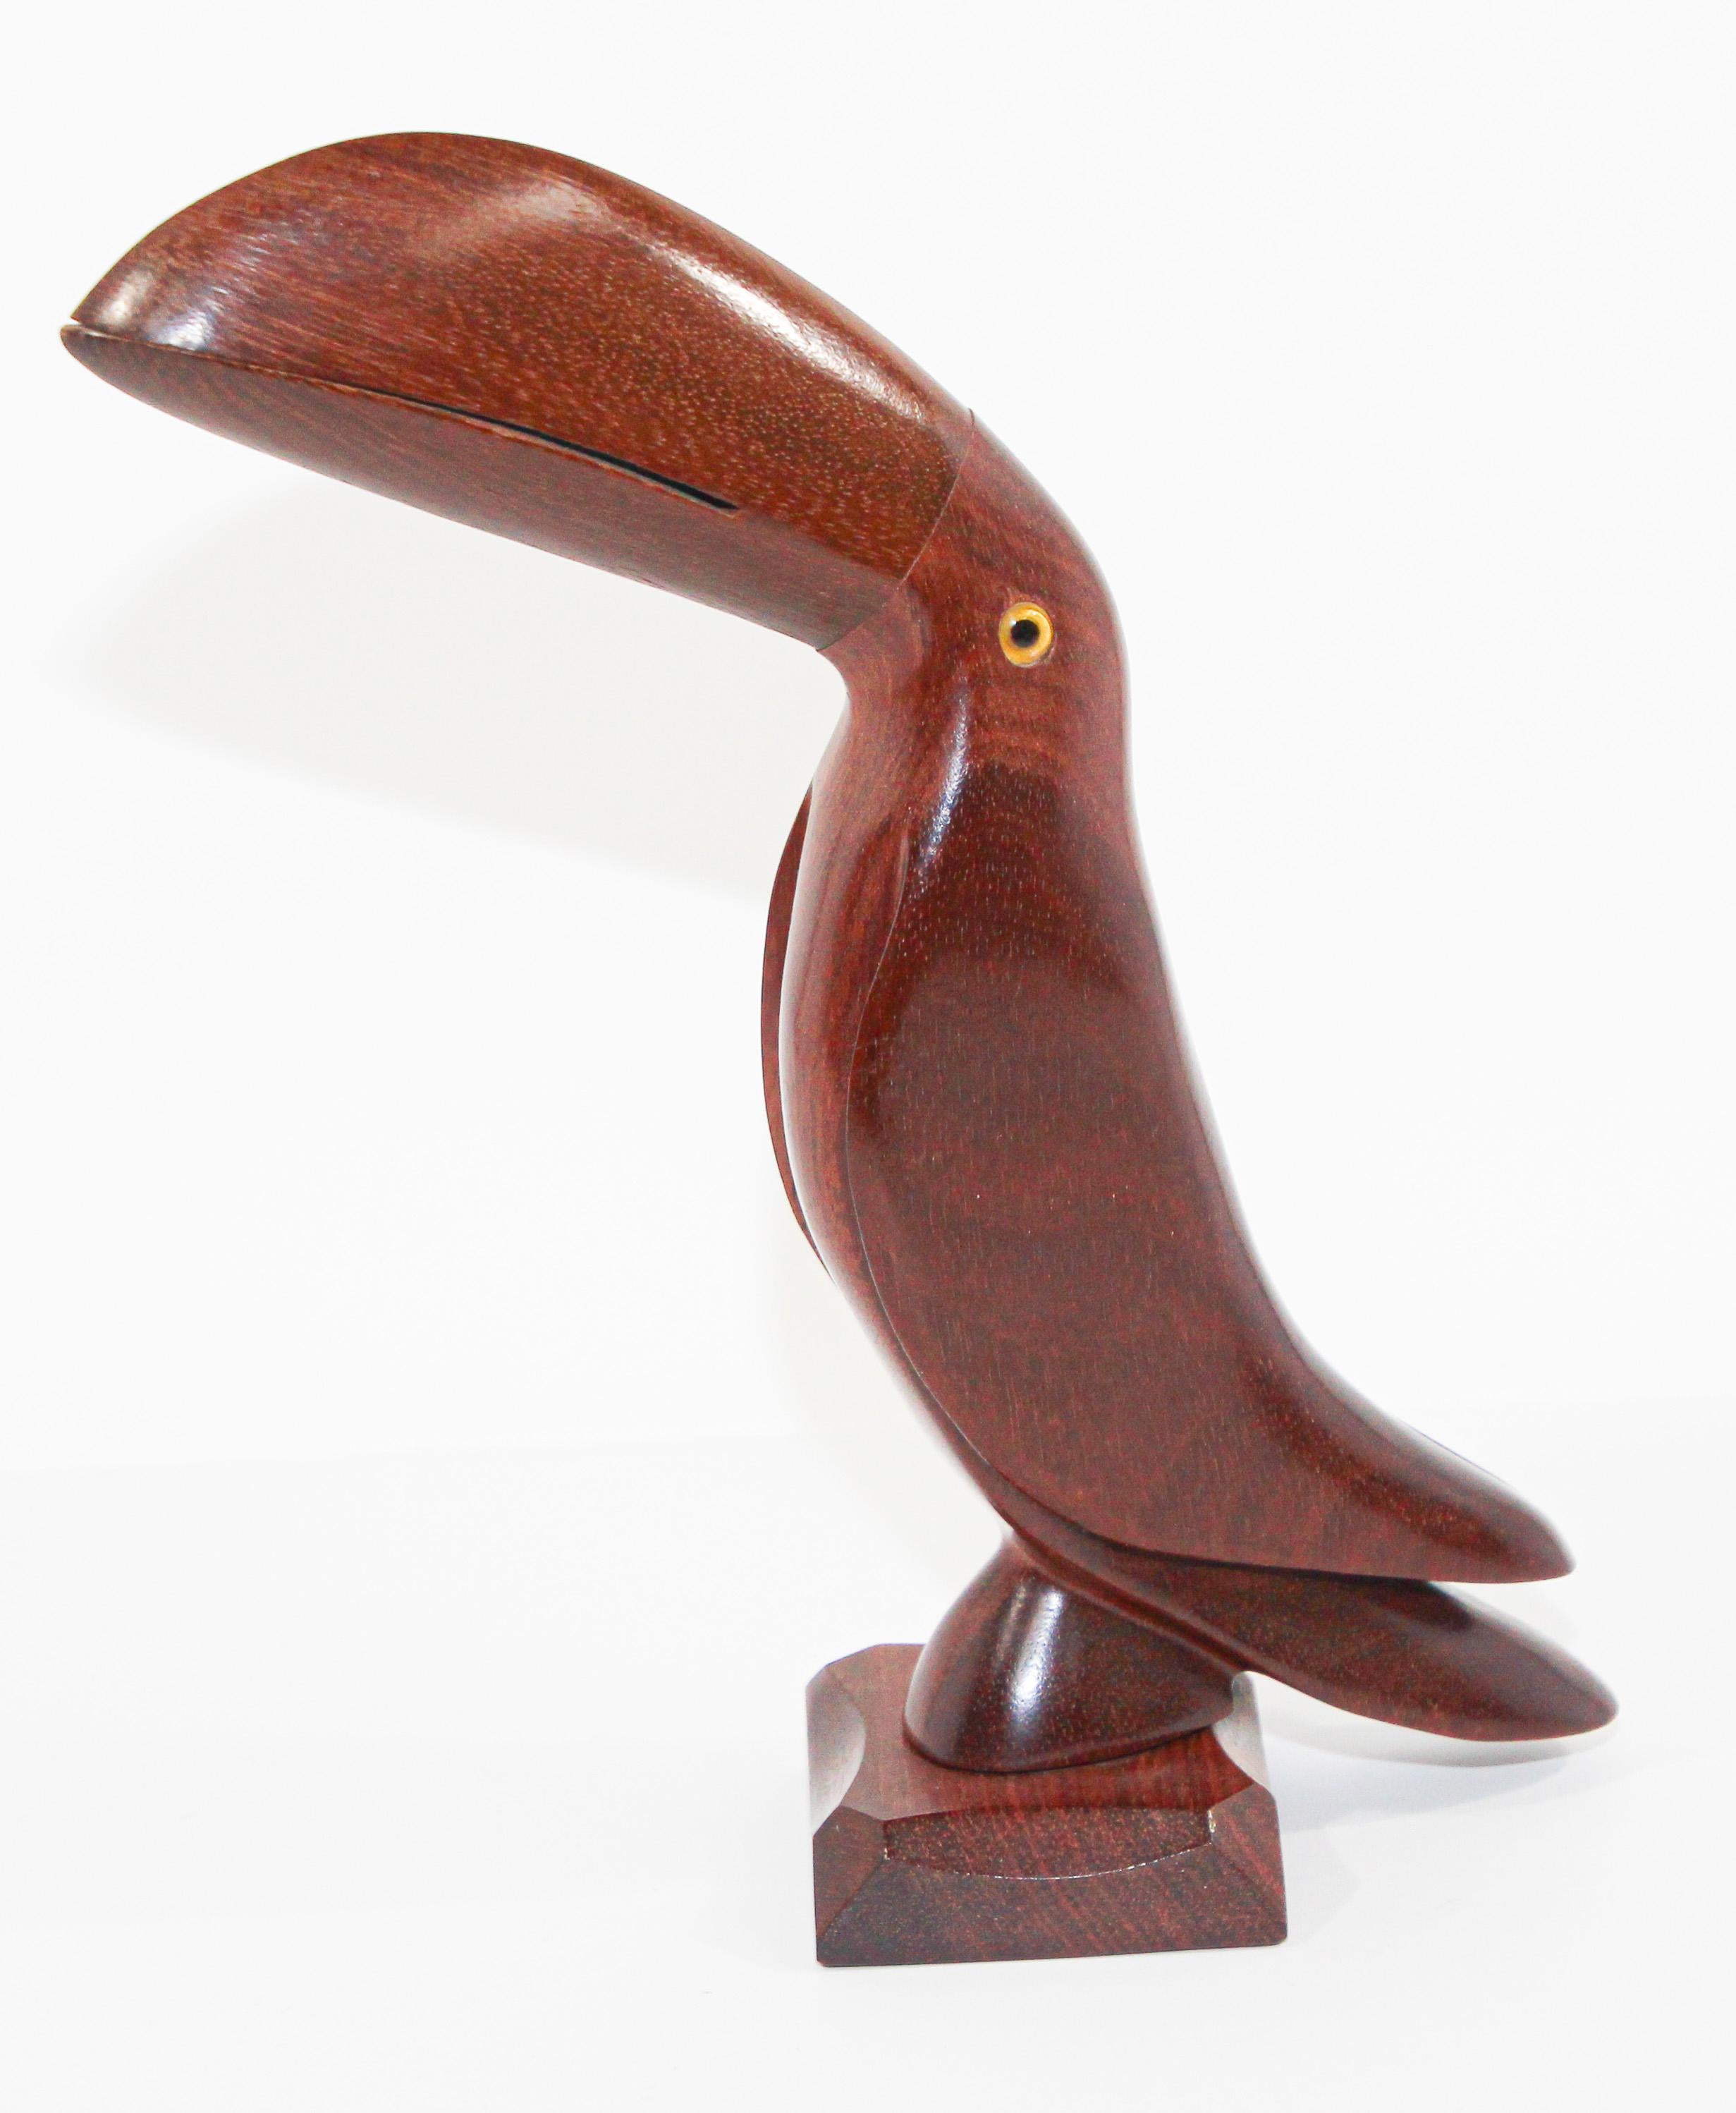 Vintage Brazilian hand carved Ironwood sculpture of a toucan.
Hand carved Brazilian toucan bird sculpture with glass eyes. 
Hand crafted in amazing detail from one of earth's hardest natural ironwood. 
This is an authentic art piece crafted of